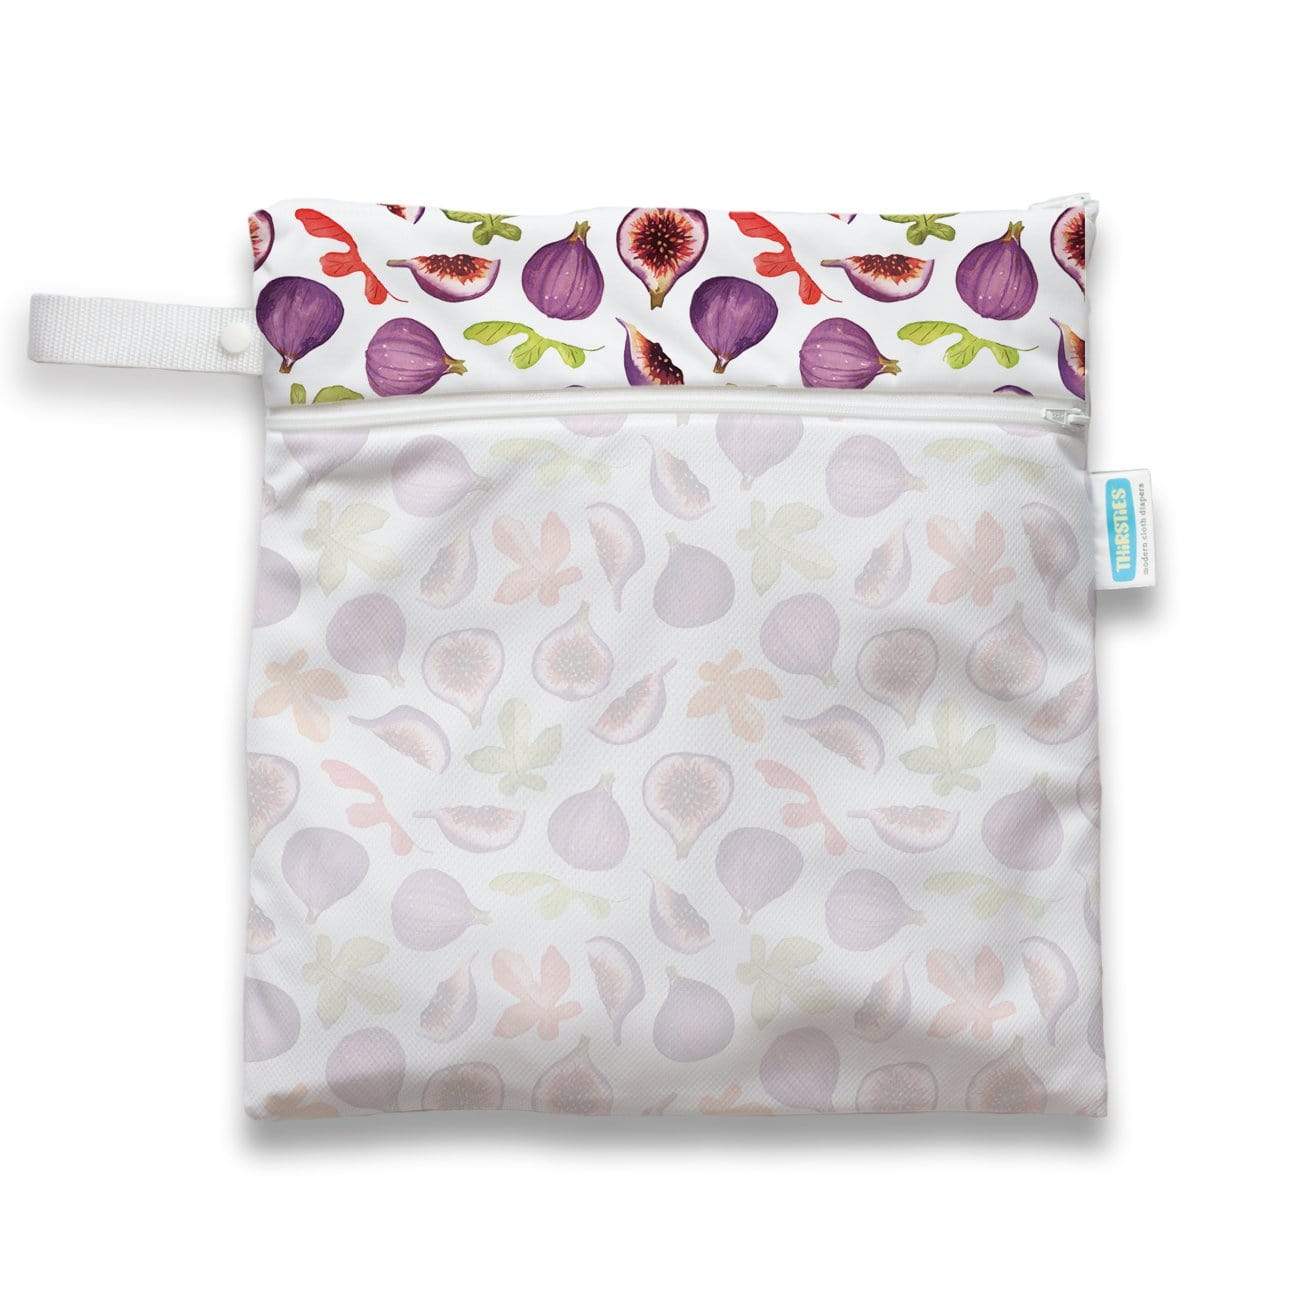 The Ultimate Guide to Cloth Diapers for Beginners